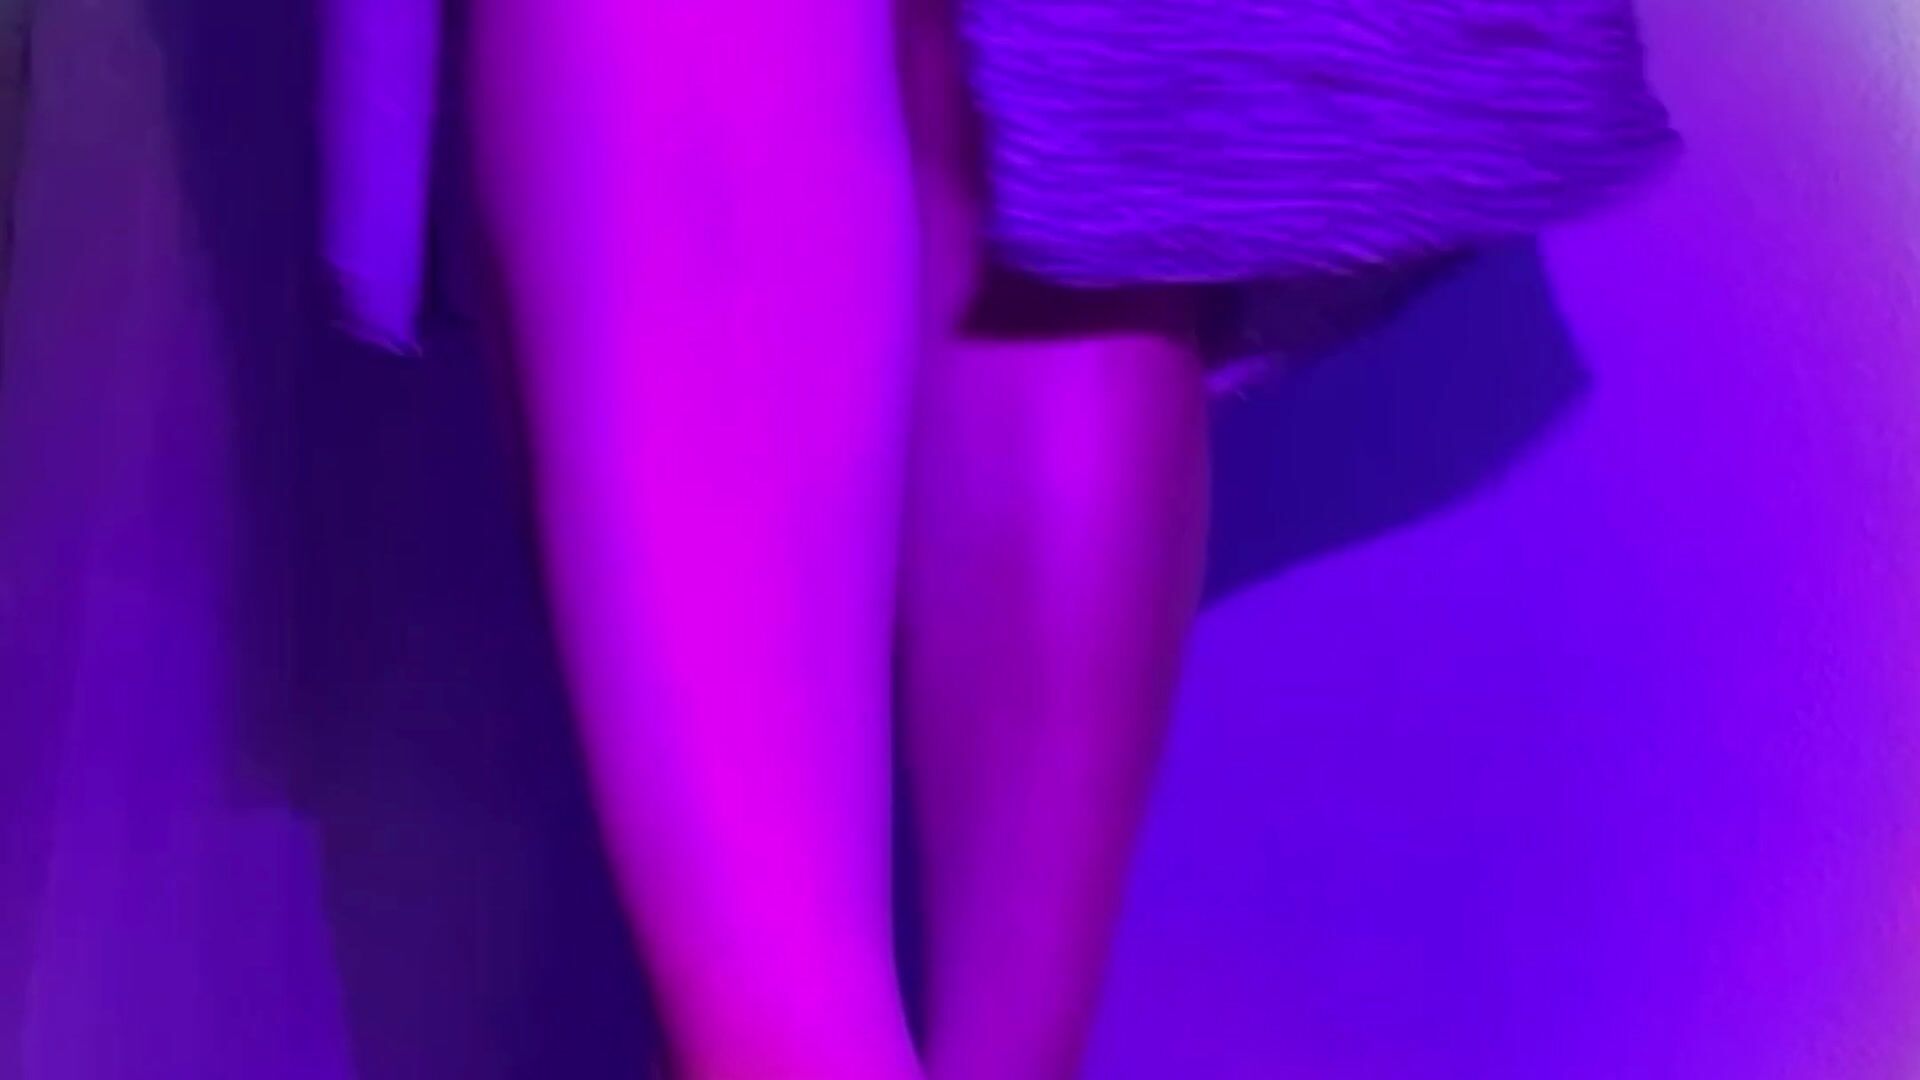 for all legs / heels lovers, watch and cum